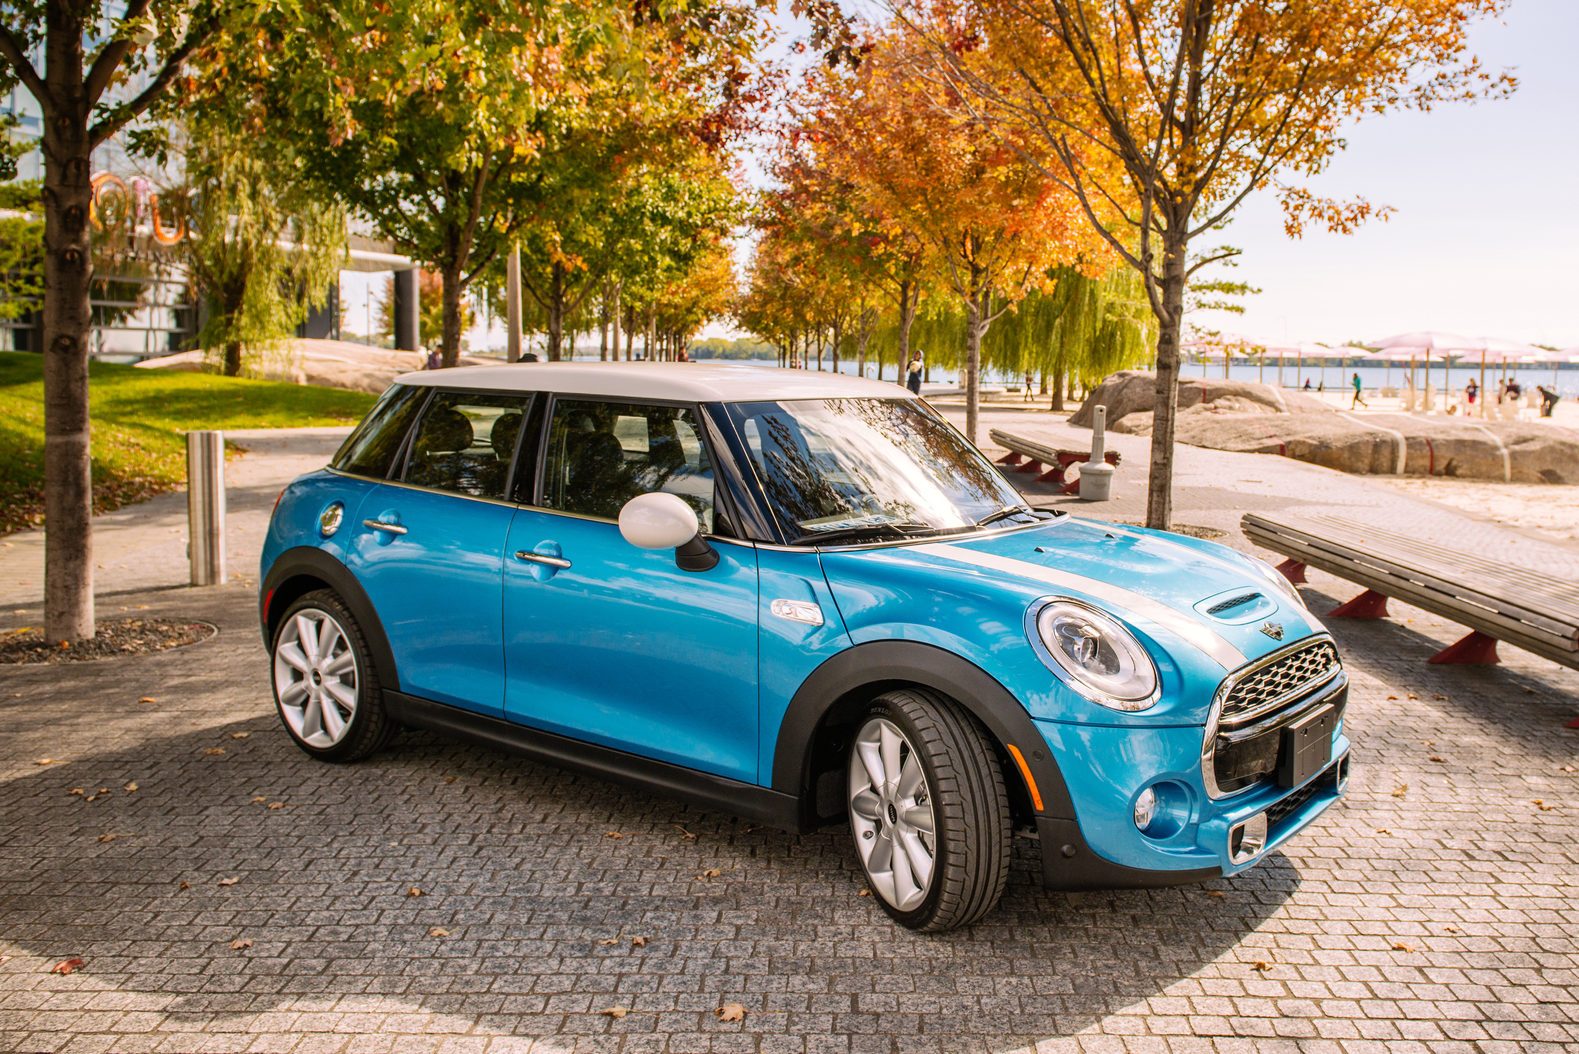 <p>They are almost too cute and have European style to spare, but the reliability of Mini models pretty much across the board, from the Roadster to the Clubman and including the classic Mini Cooper itself, drags down their value in the used car market. You will end up paying too much at the repair shop for this one.</p>